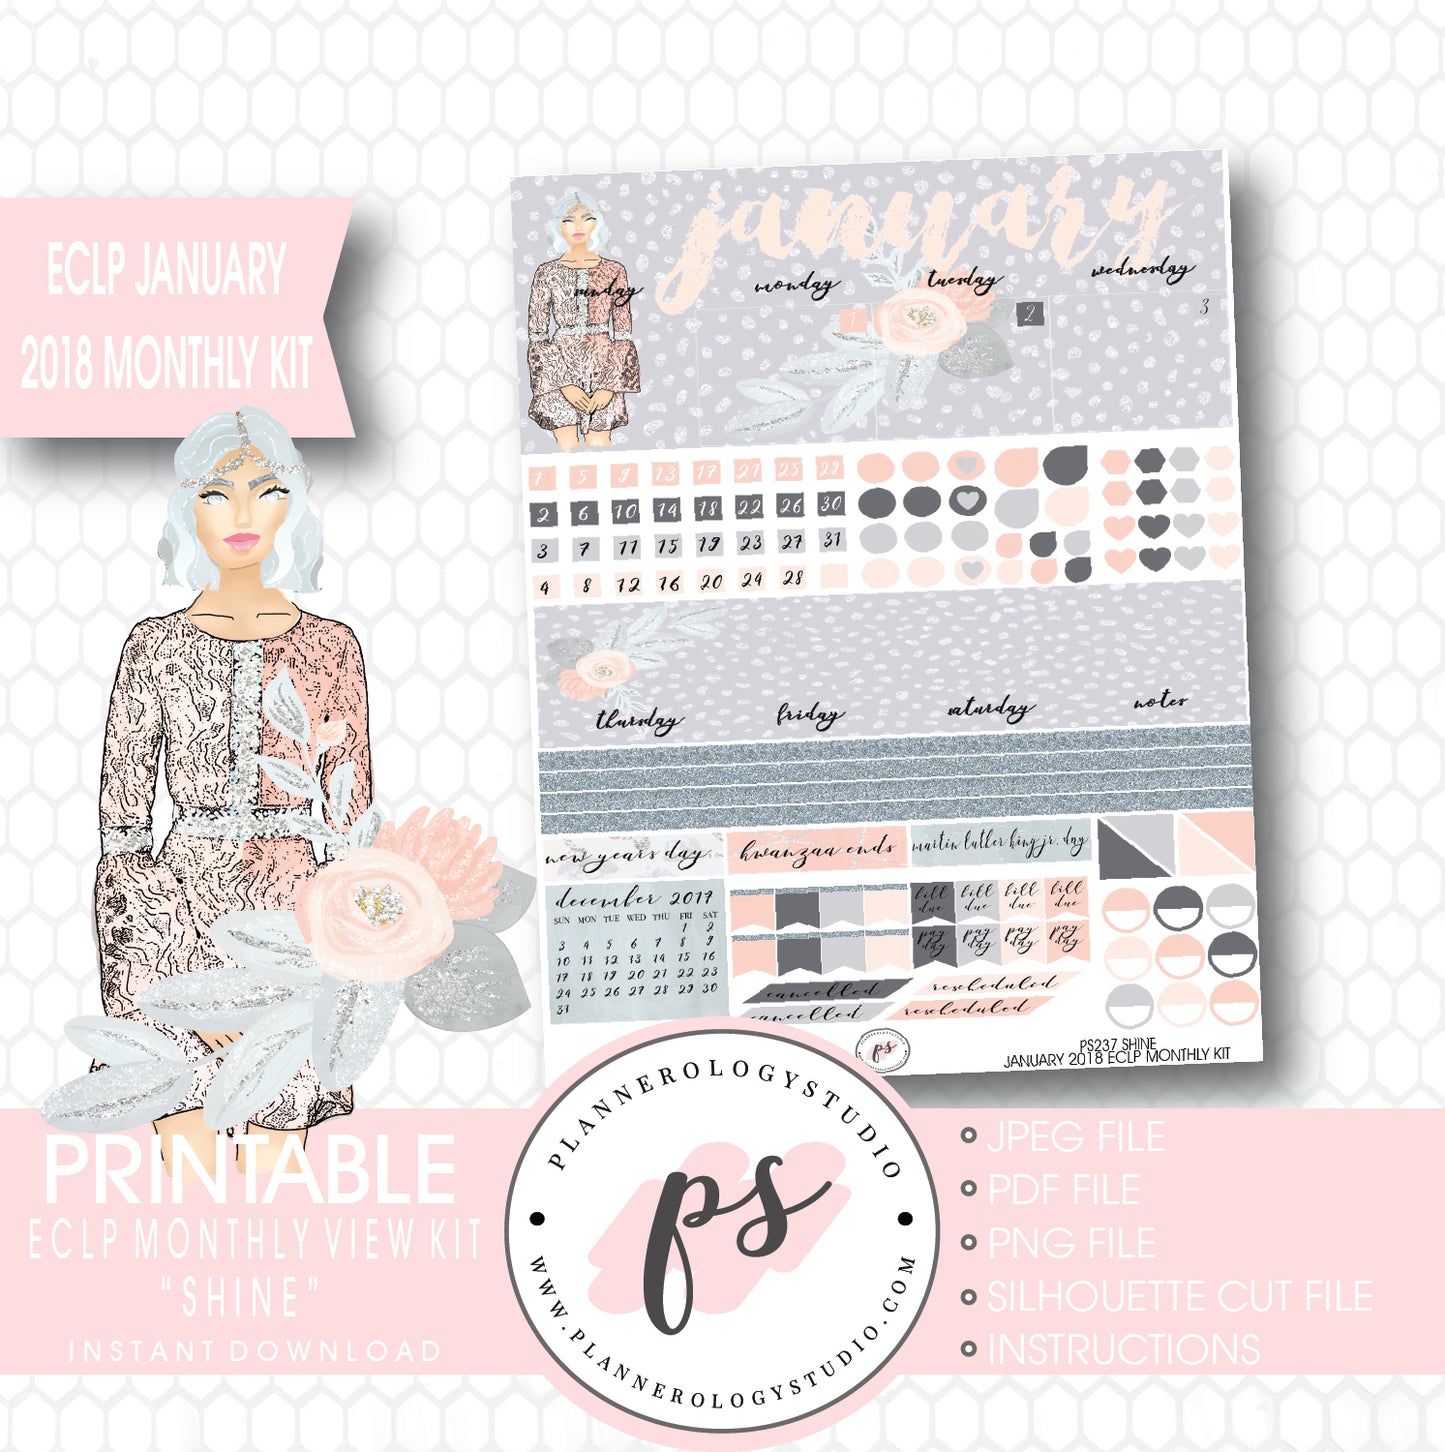 Shine January 2018 Monthly View Kit Printable Planner Stickers (for use with ECLP) - Plannerologystudio